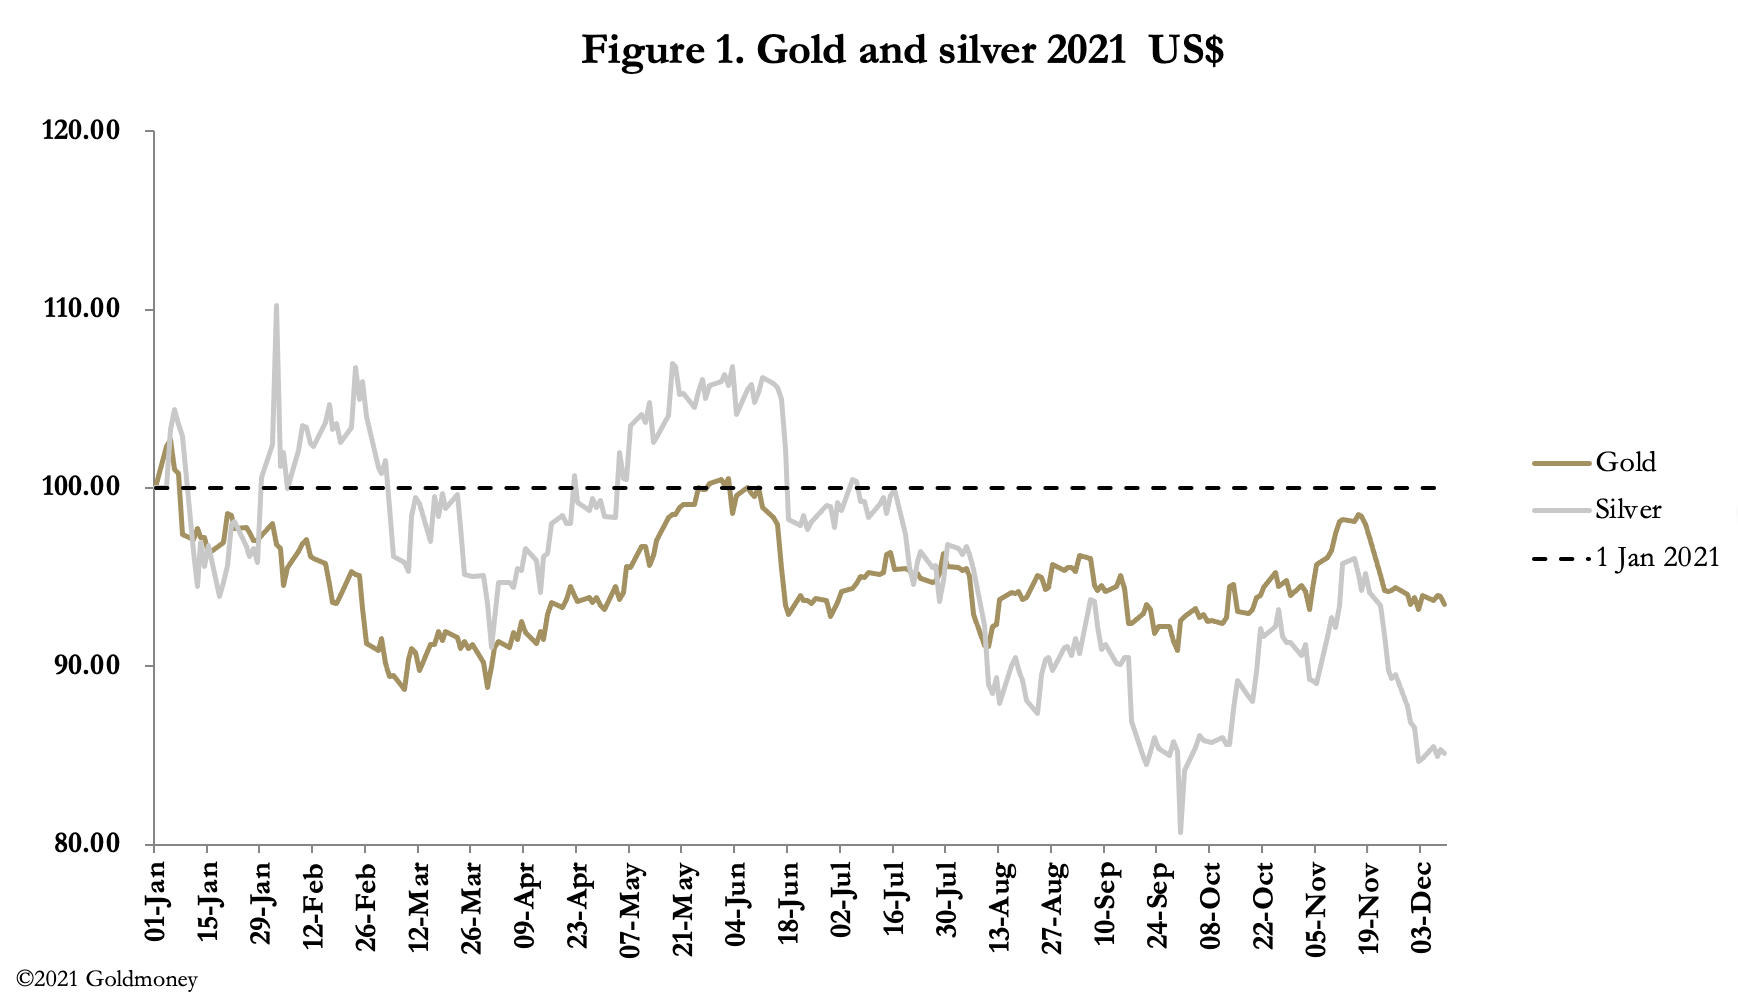 Silver And Gold 2021 In US$